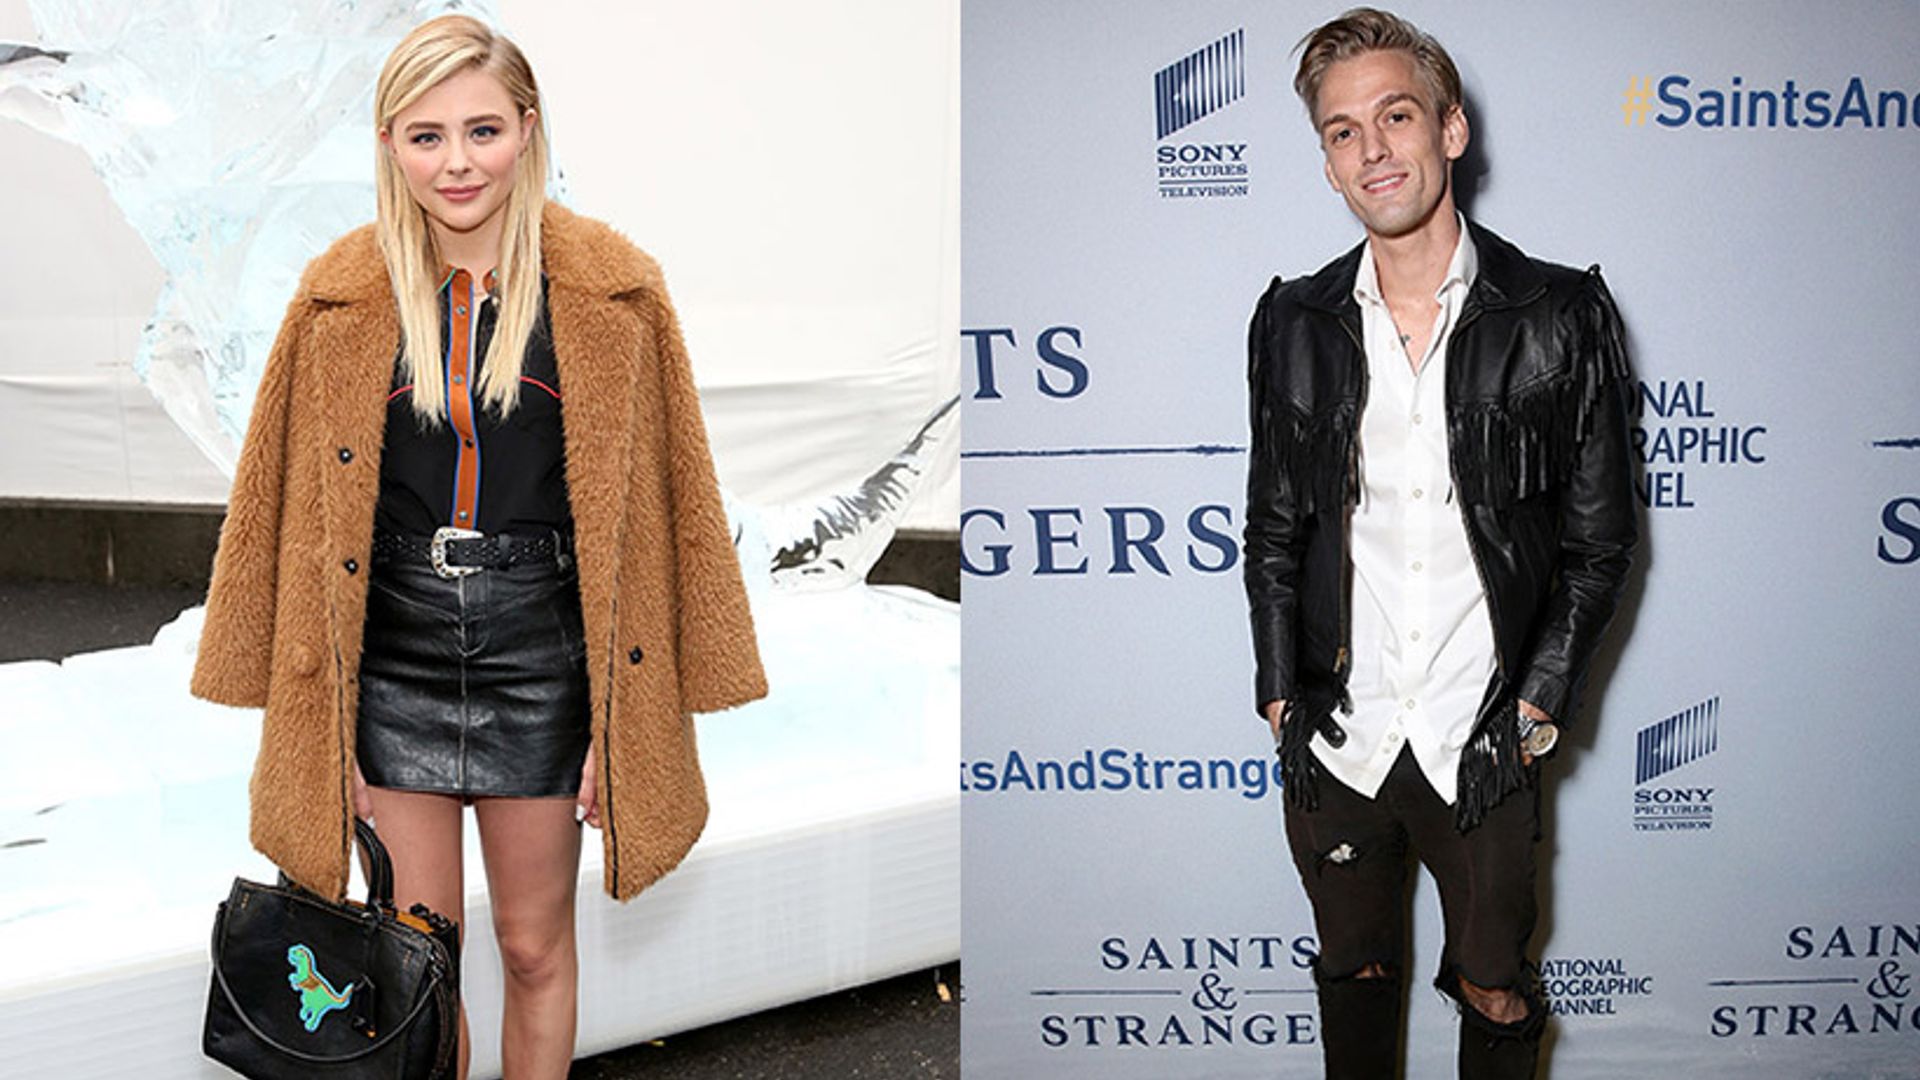 Aaron Carter has asked Chloe Moretz out on Twitter